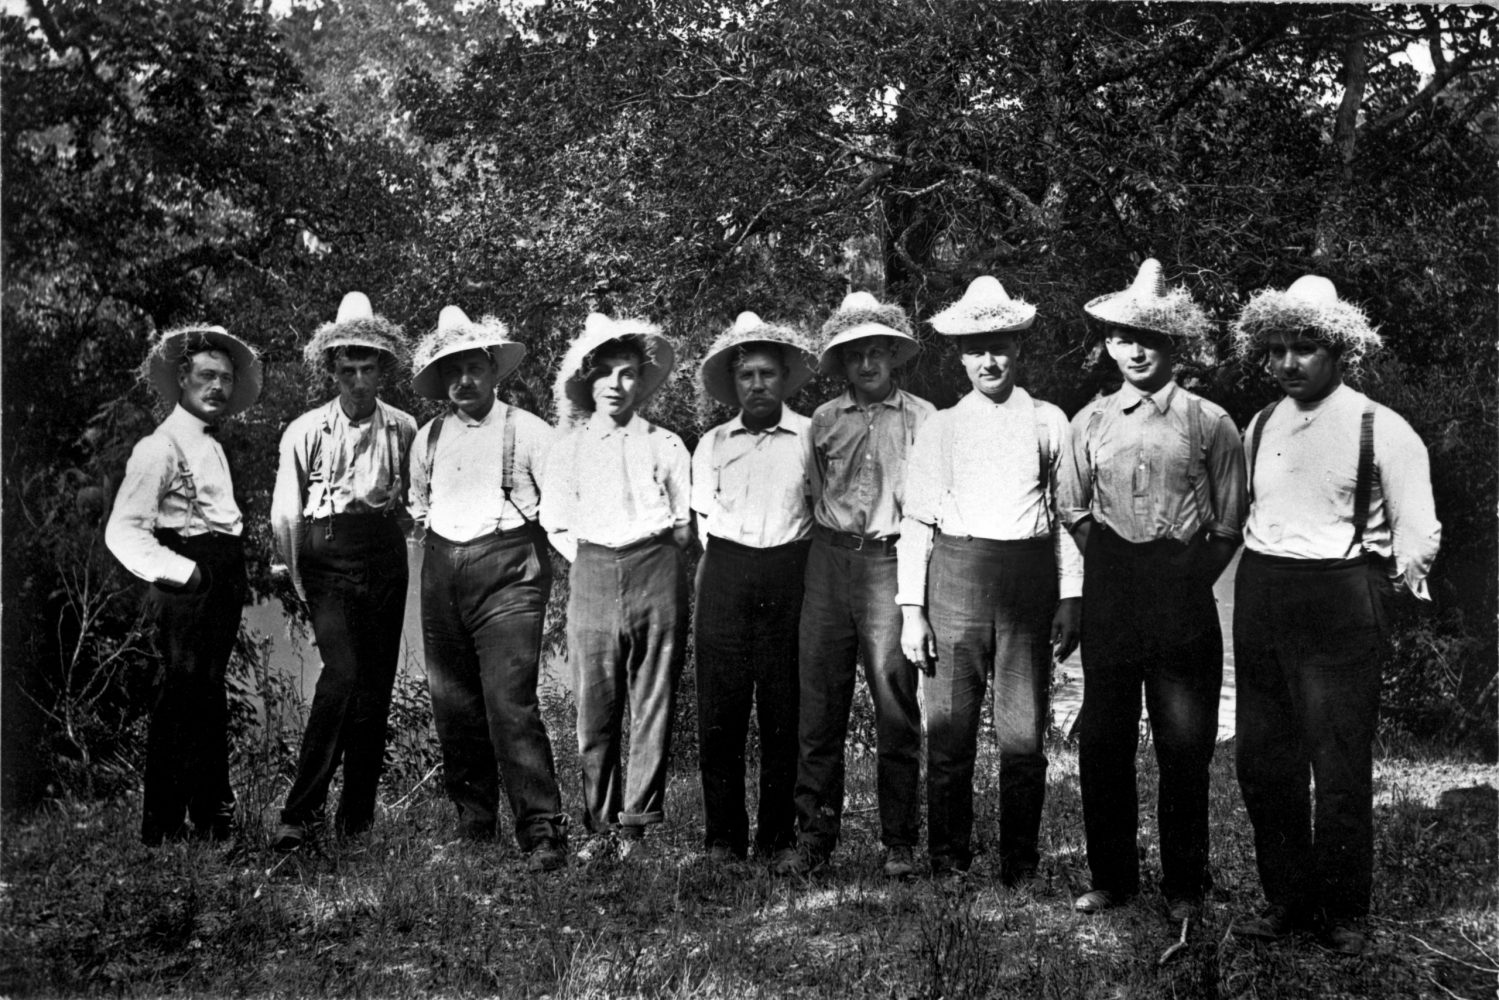 Picknickers wearing wide-brimmed hats trimmed with Spanish moss. Members of the Peter Jud and Henry Wosnig families, on Salado Creek south of San Antonio, c. 1910
Janice B. Schwab and Adele J. Steiger, New Braunfels, Texas
UTSA Special Collections